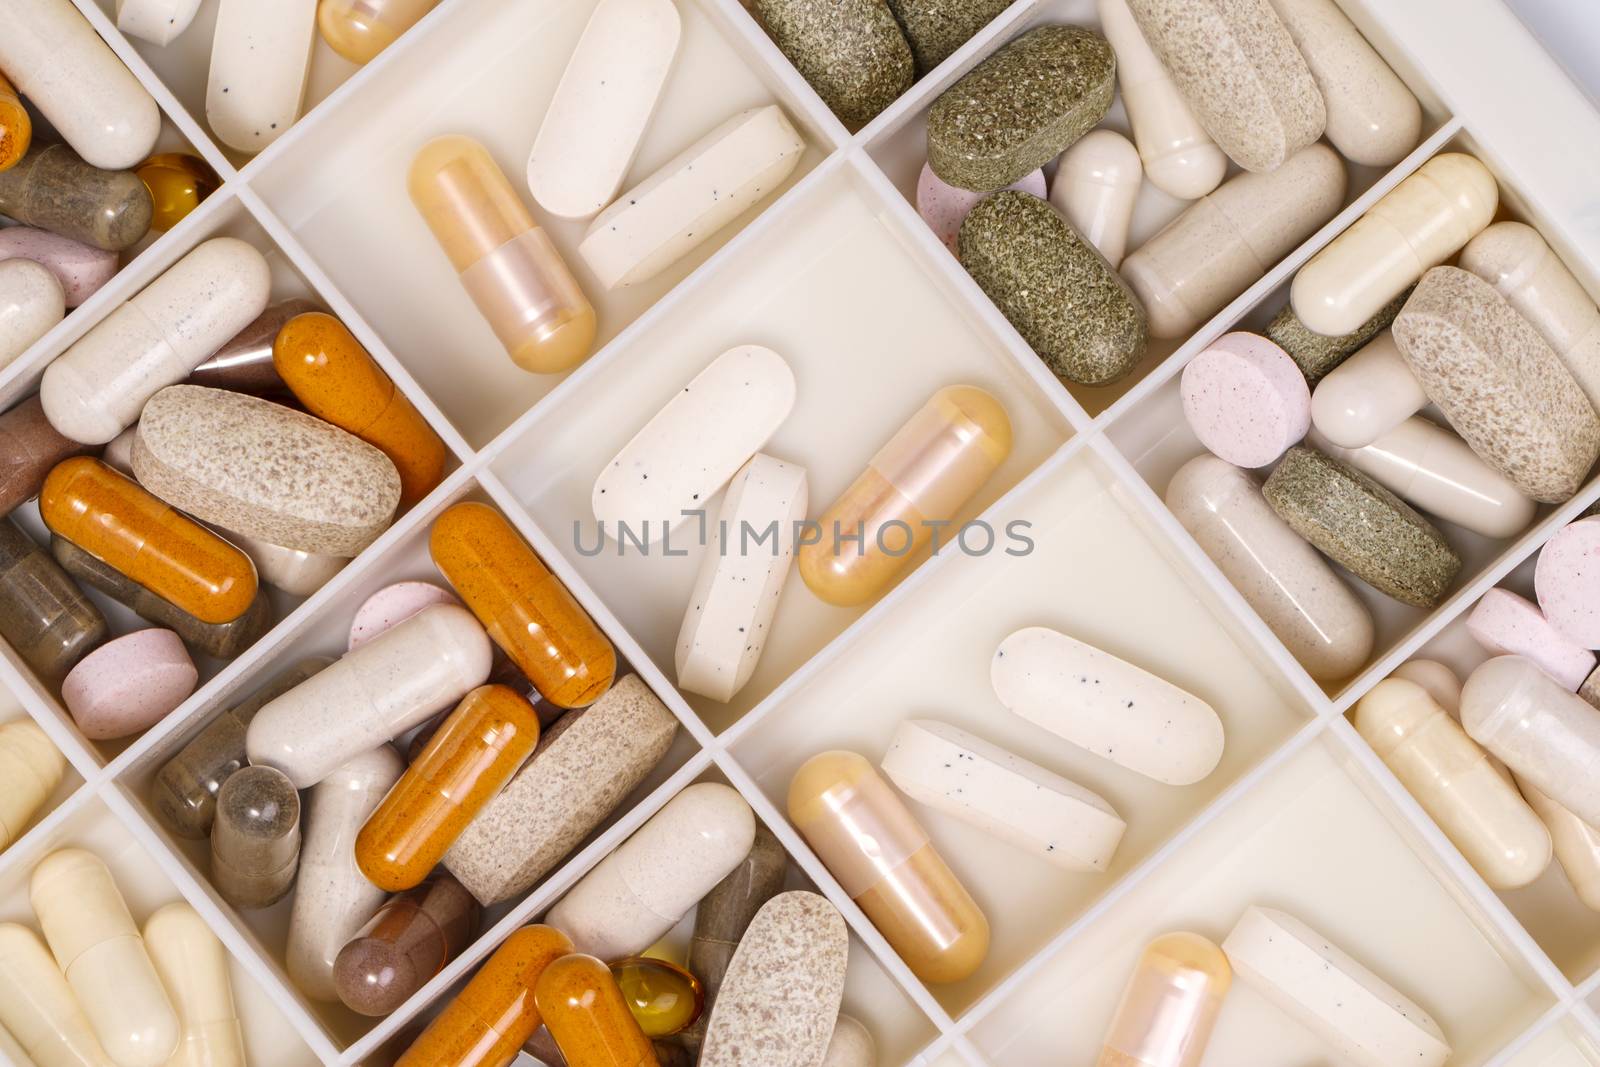 plastic medicine organizer with pills and capsules, medicines for health, pharmaceutical health care and sciences concept, shallow depth of field